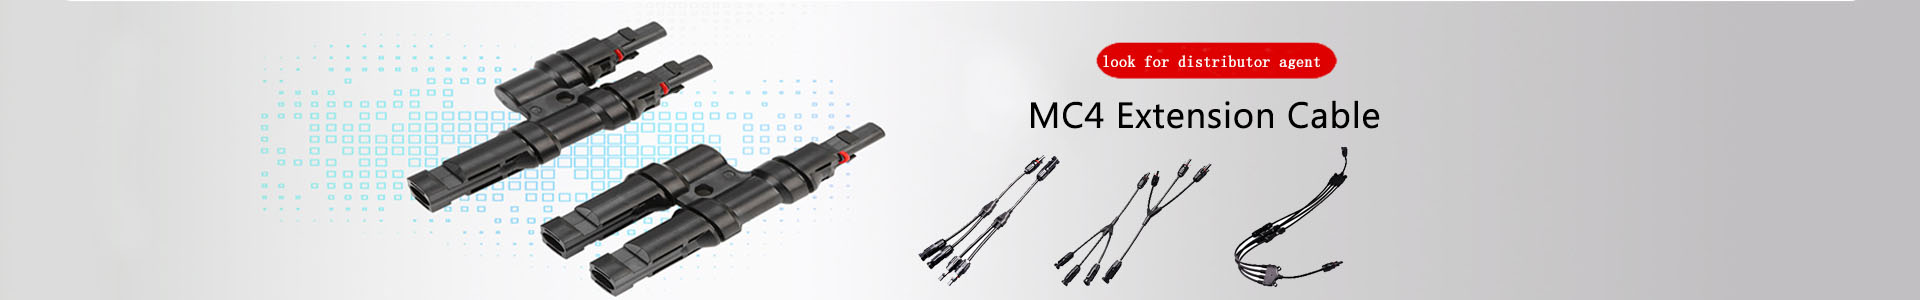 Analysis of various indicators of photovoltaic connectors-Company news-Solar | solar connector,solar branch connector,diode fuse connector,MC4 extnsion cable,H1Z2Z2 solar cable, UL4703 solar cable | Leading manufacturer and supplier of solar pv cables and connectors